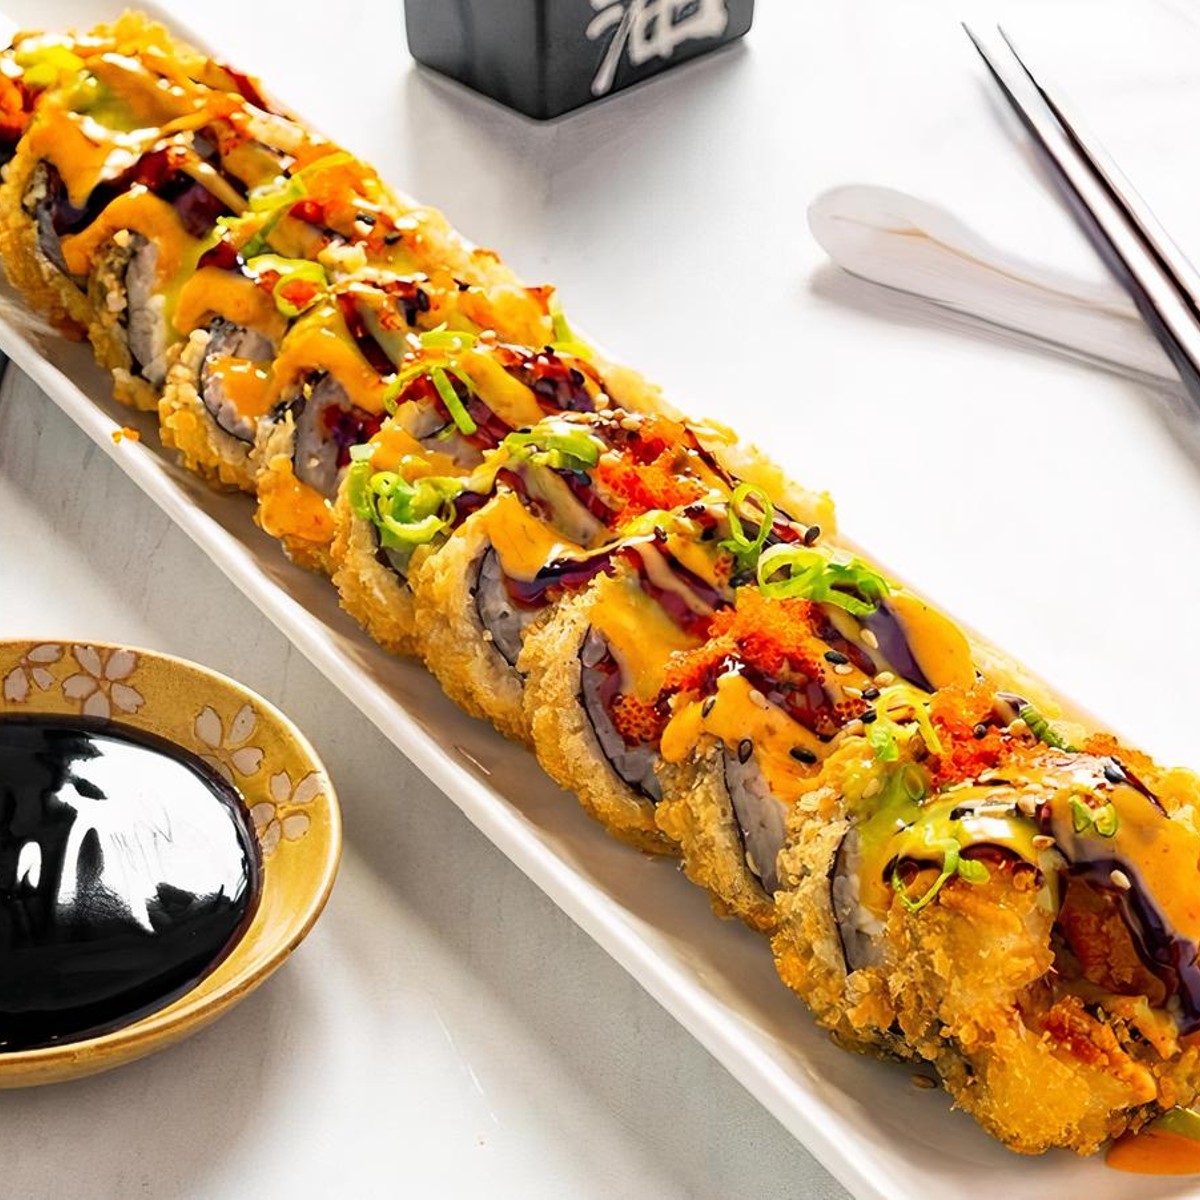 This Place in Yakima sells Deep Fried Sushi Rolls, and They're Amazing